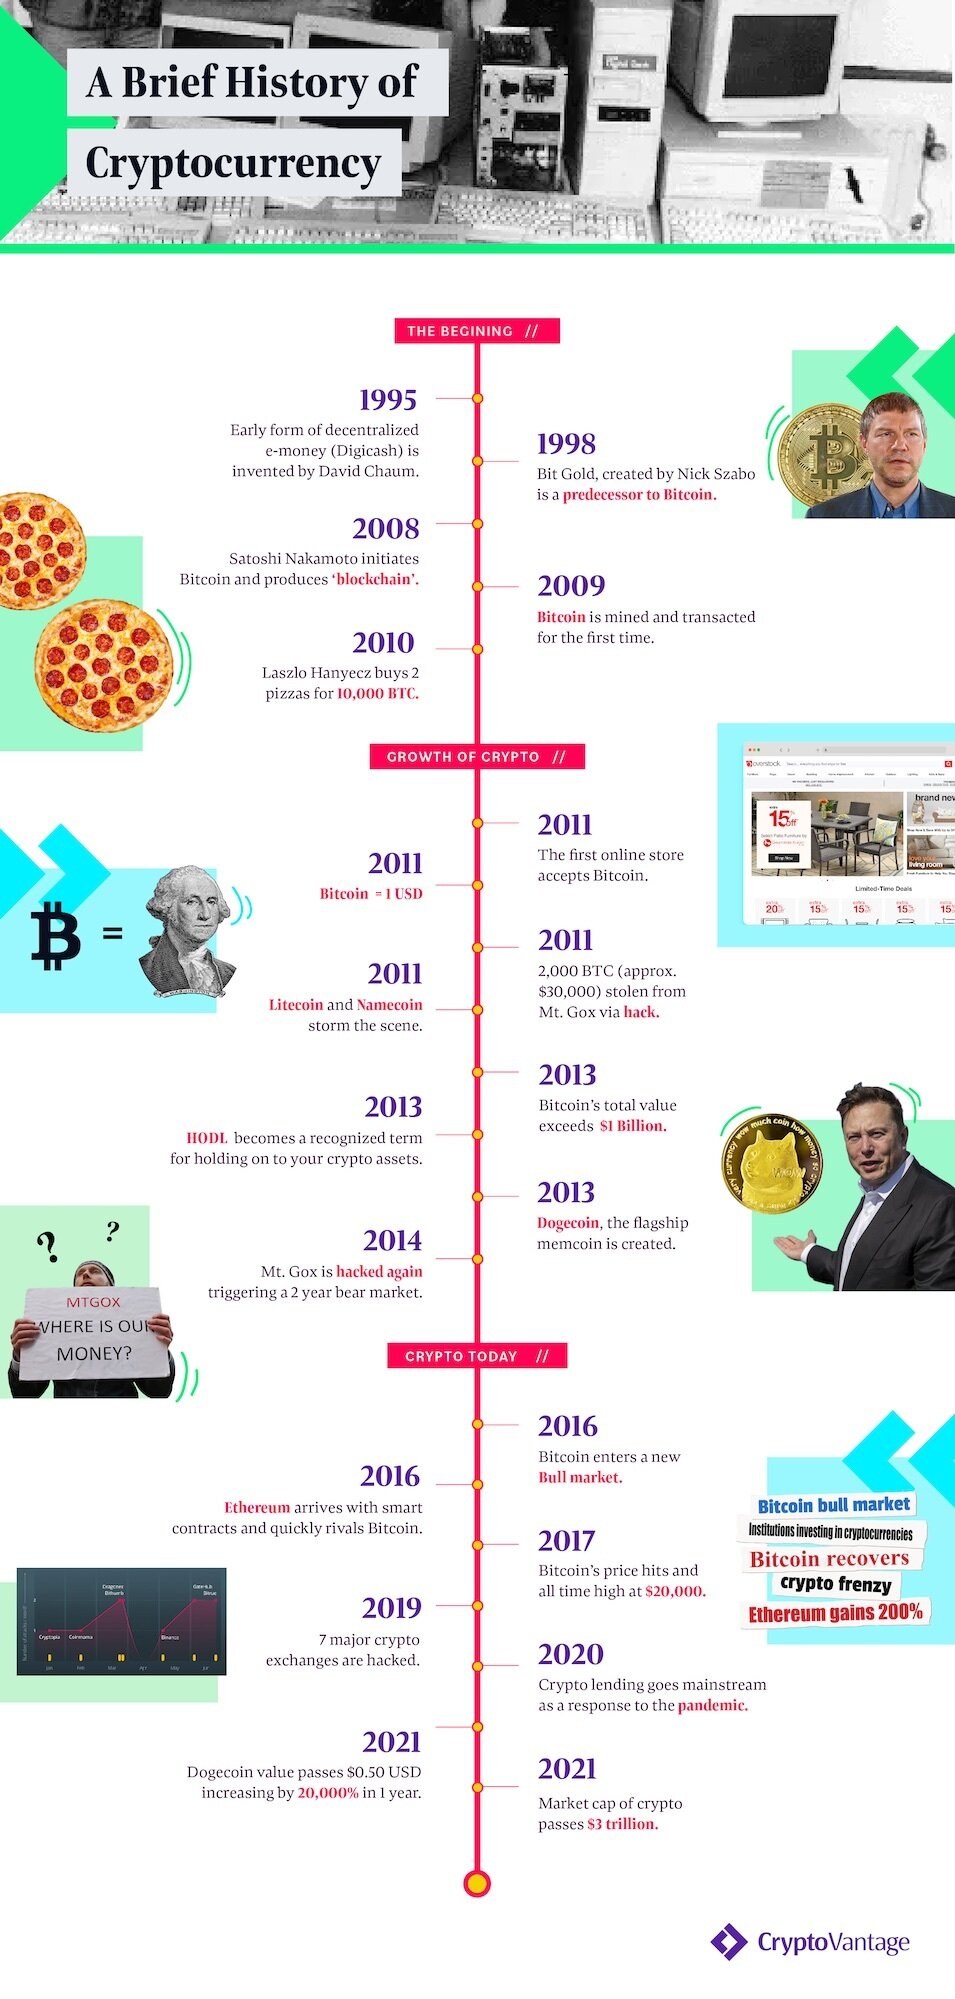 A brief history of cryptocurrency infographic.